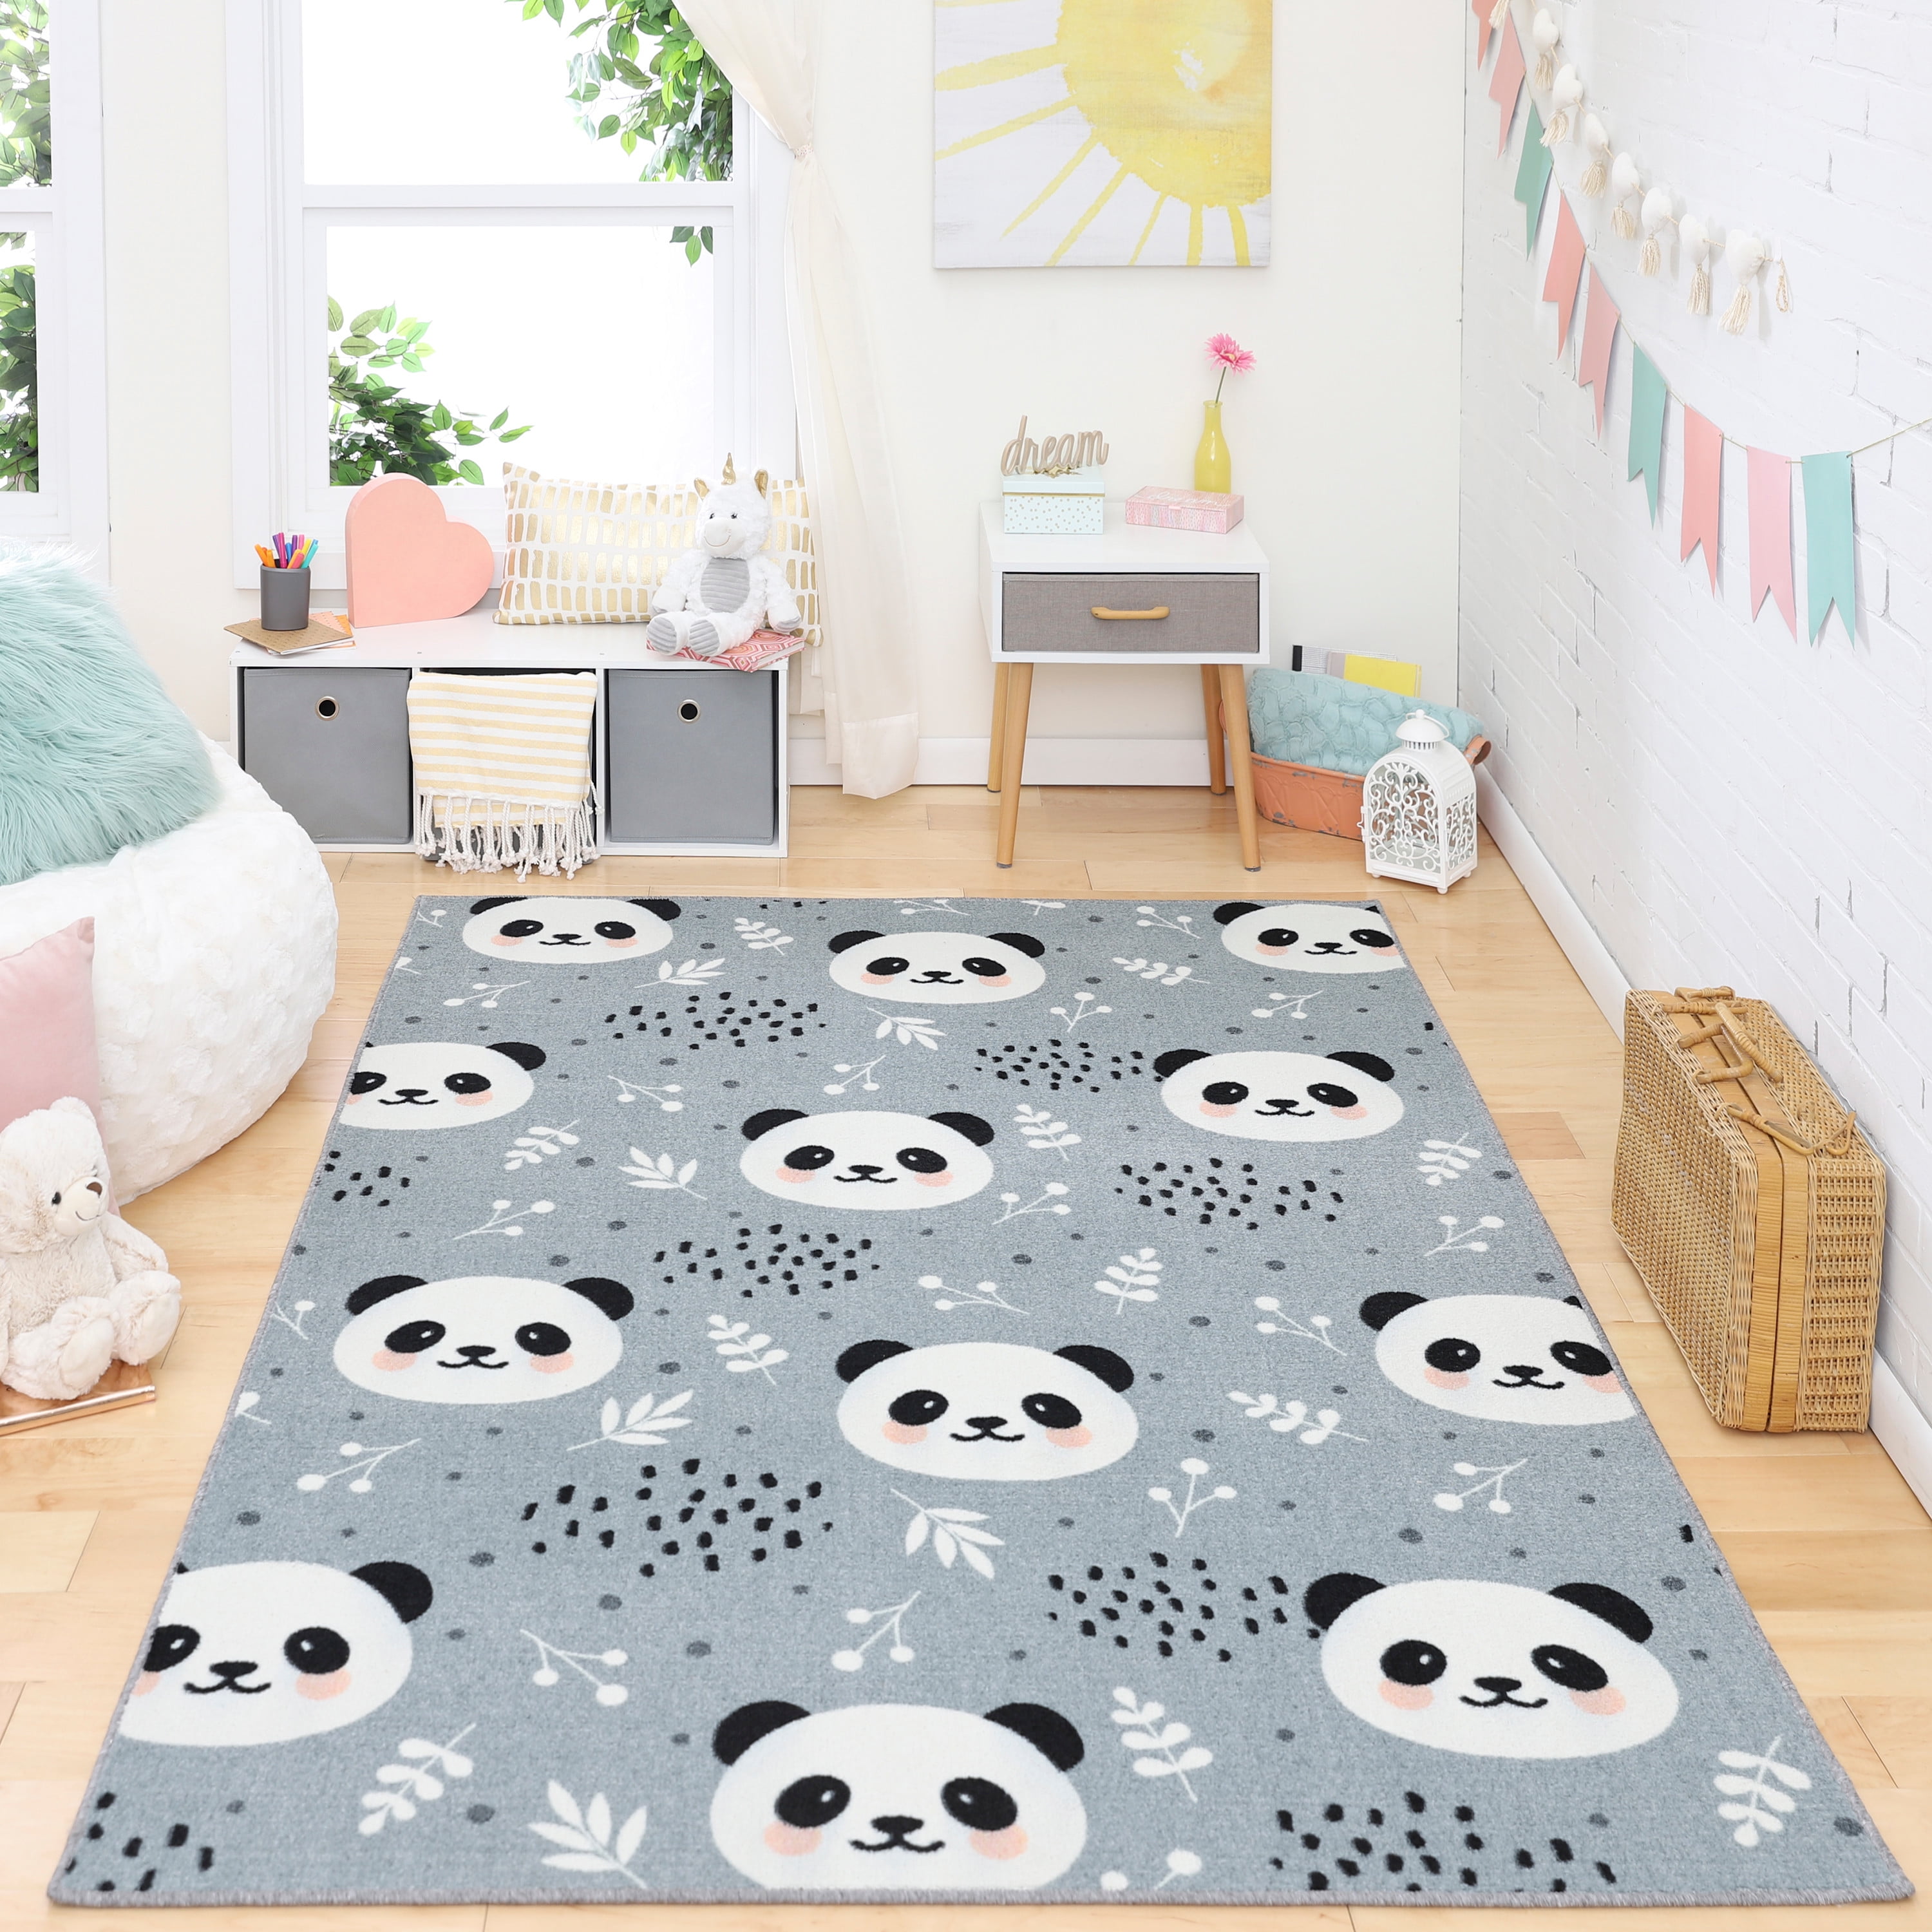 Round Area Rugs Animal Panda Brown Indoor/Outdoor Rugs Circular Floor Mat for Dining Dorm Room Bedroom Home Office patios Clearance  3 Ft